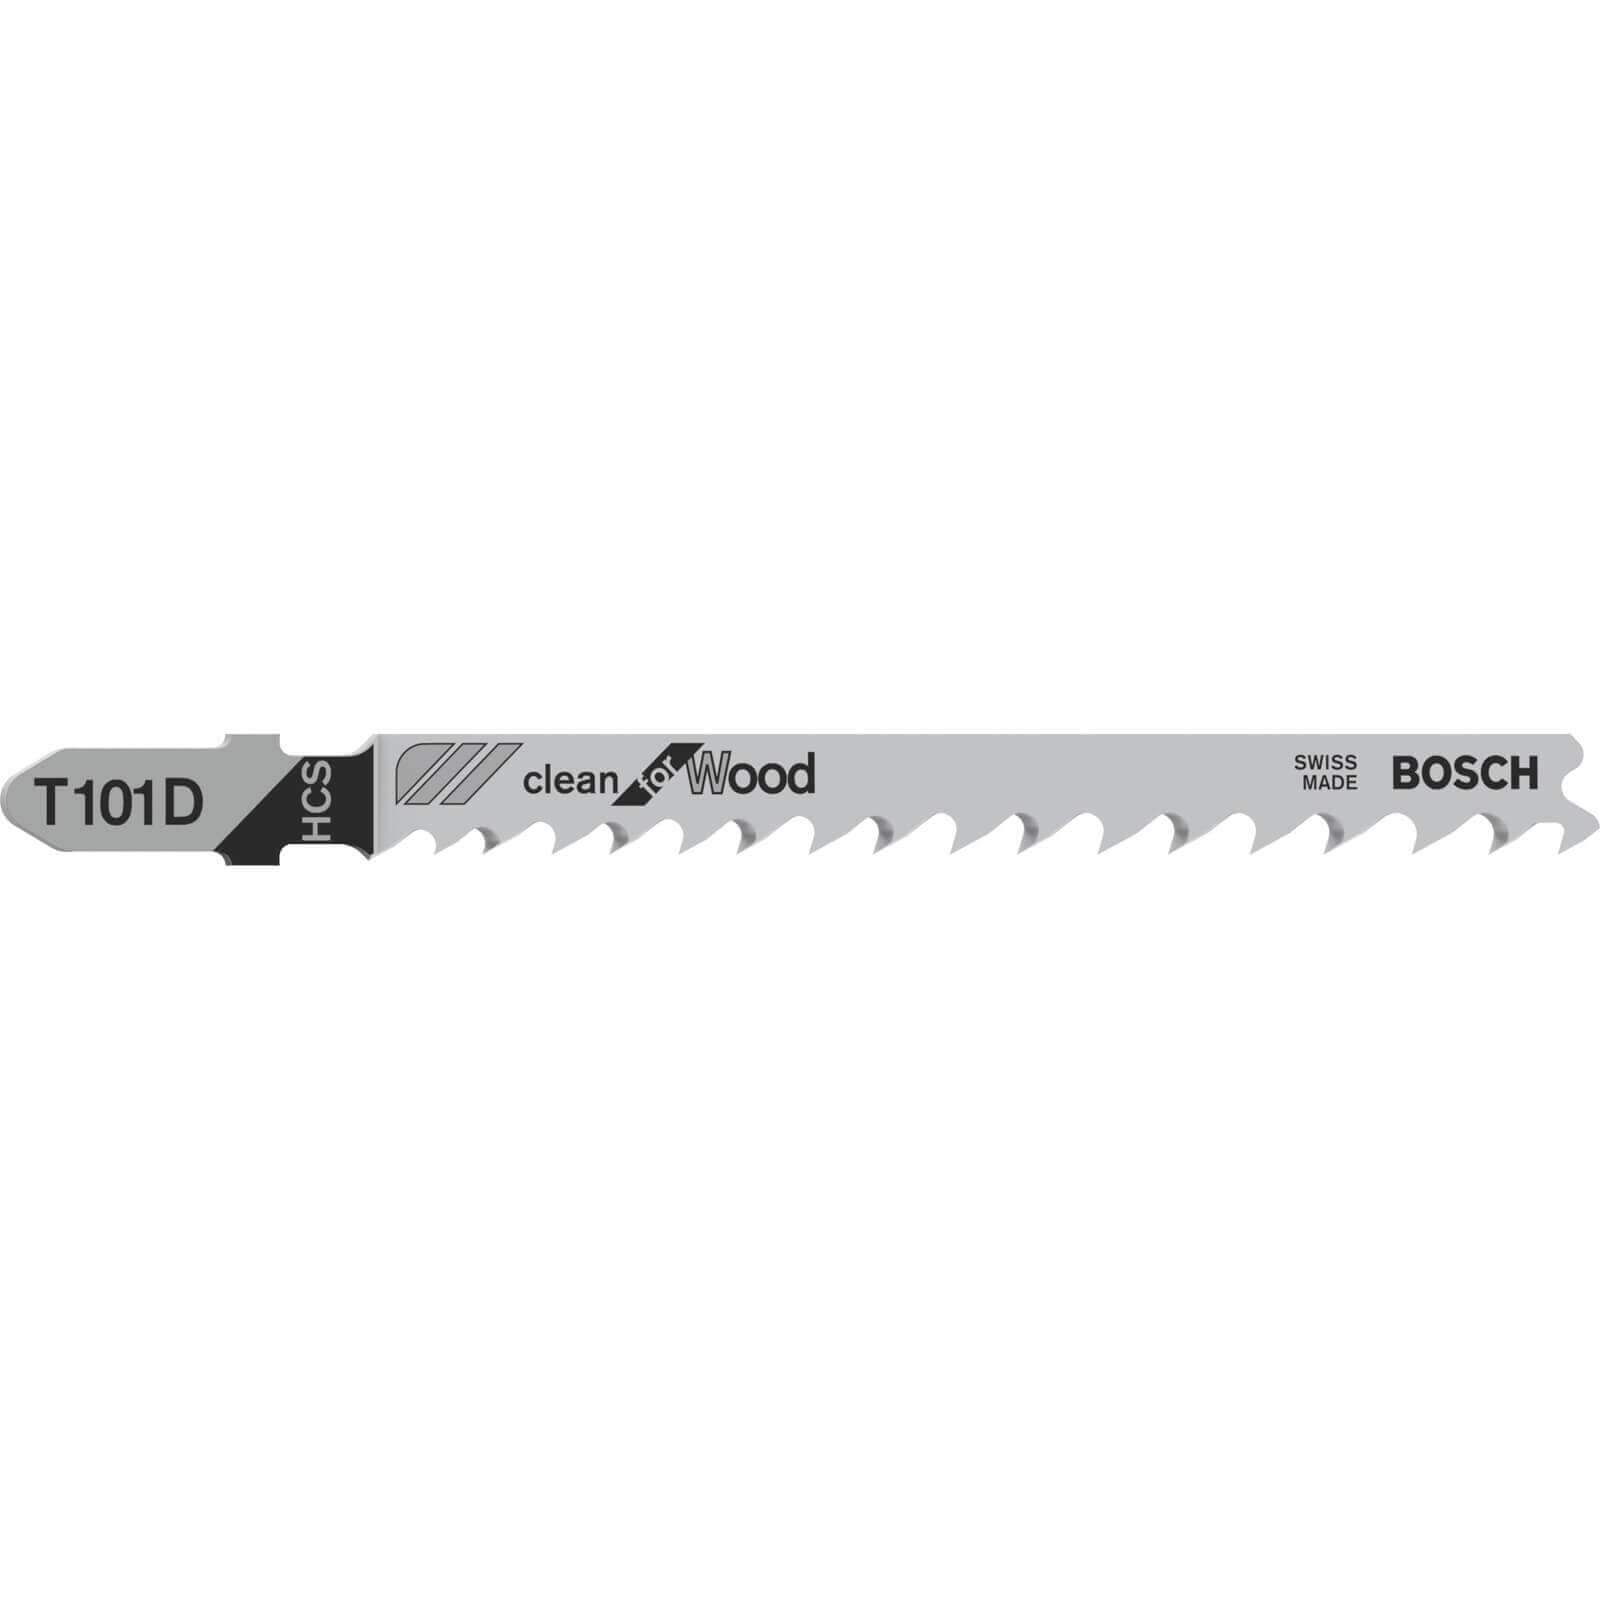 Image of Bosch T101 D Wood Cutting Jigsaw Blades Pack of 5